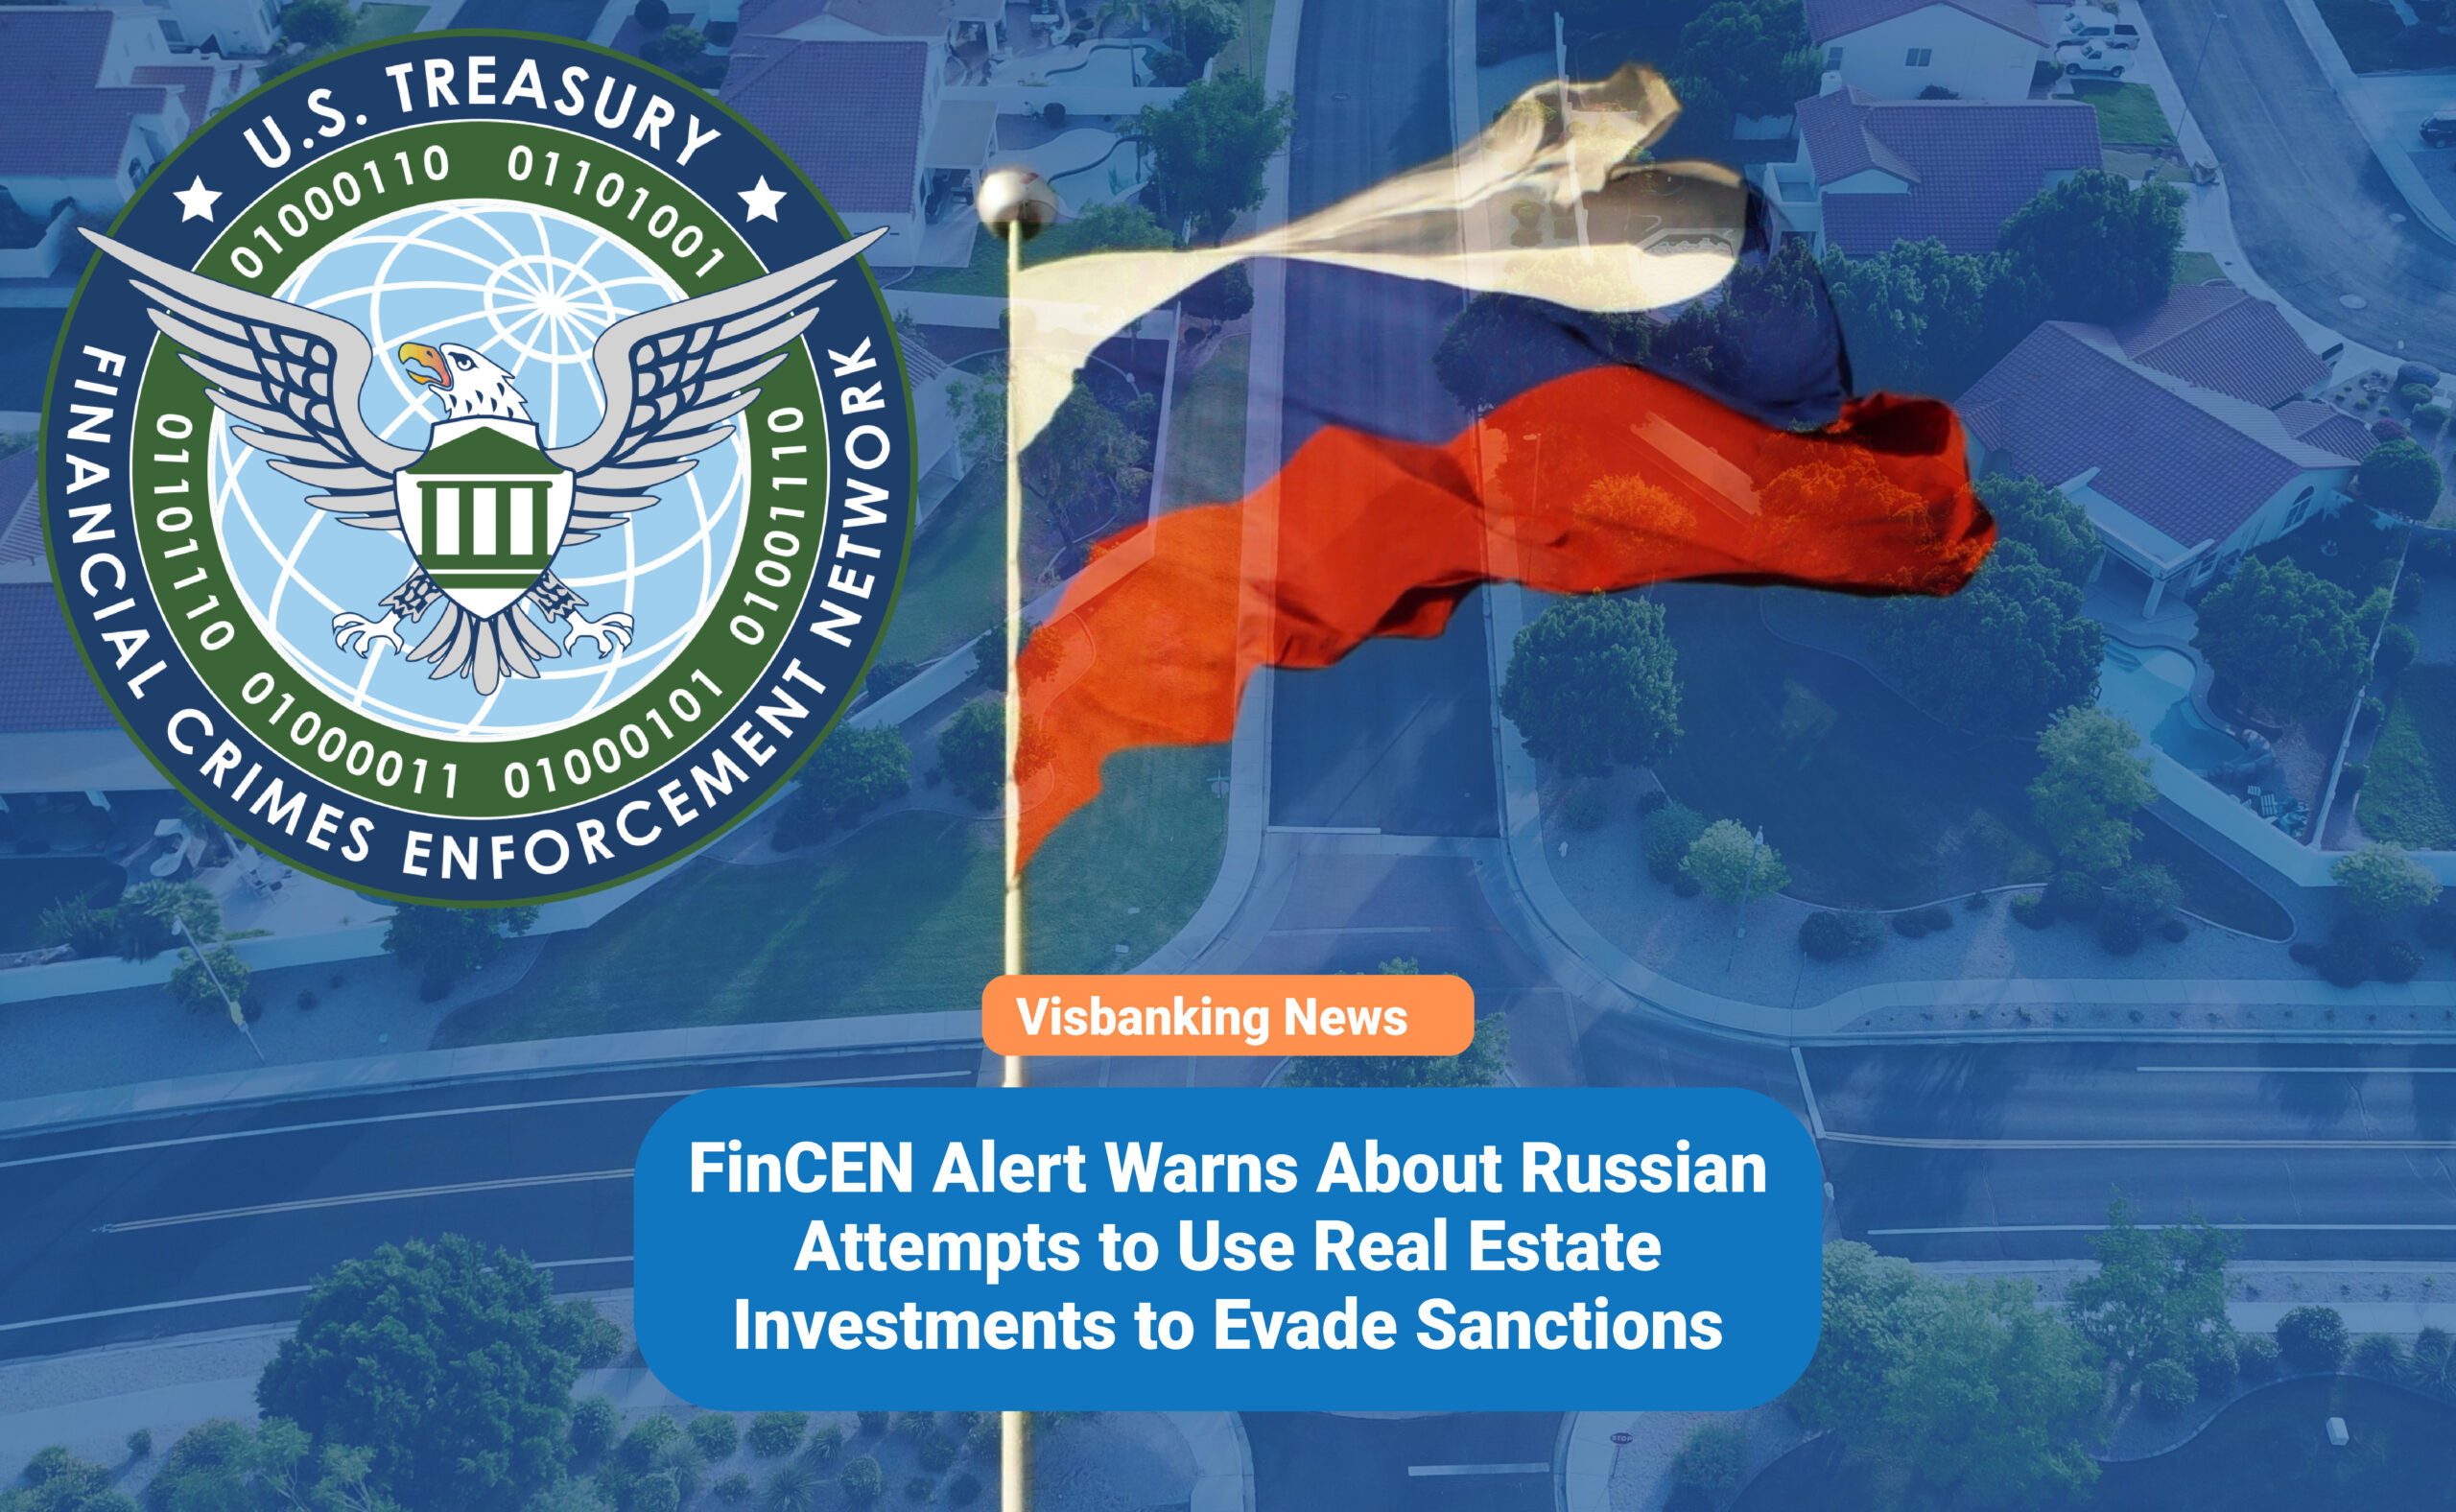 FinCEN Alert Warns About Russian Attempts to Use Real Estate Investments to Evade Sanctions